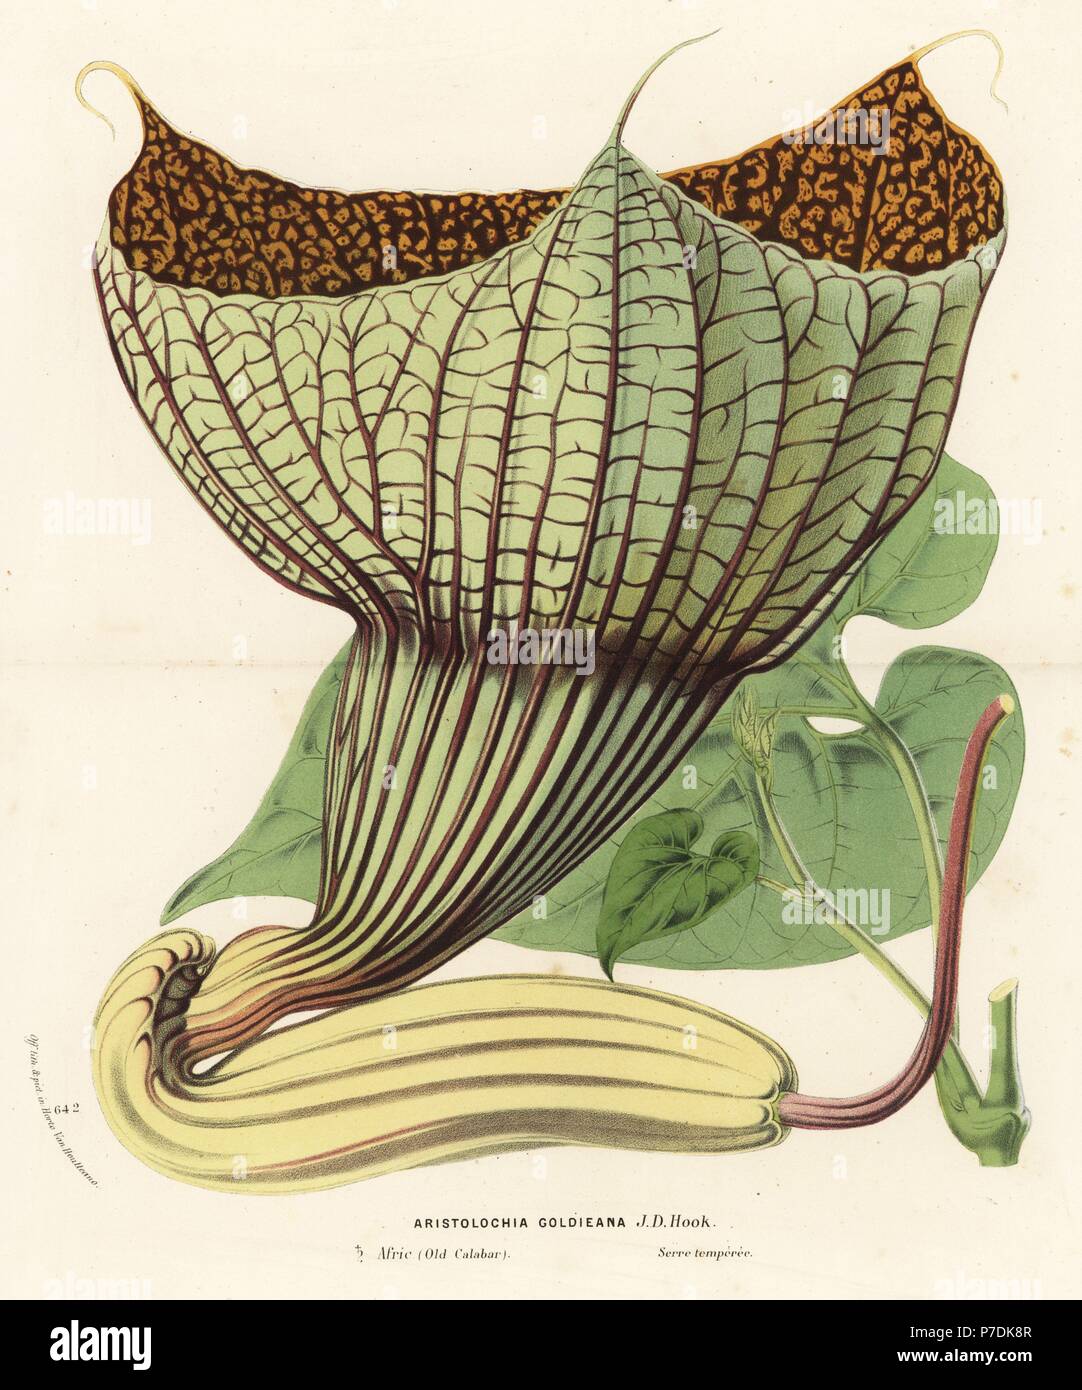 Pararistolochia goldieana (Aristolochia goldieana). Handcoloured lithograph from Louis van Houtte and Charles Lemaire's Flowers of the Gardens and Hothouses of Europe, Flore des Serres et des Jardins de l'Europe, Ghent, Belgium, 1867-1868. Stock Photo